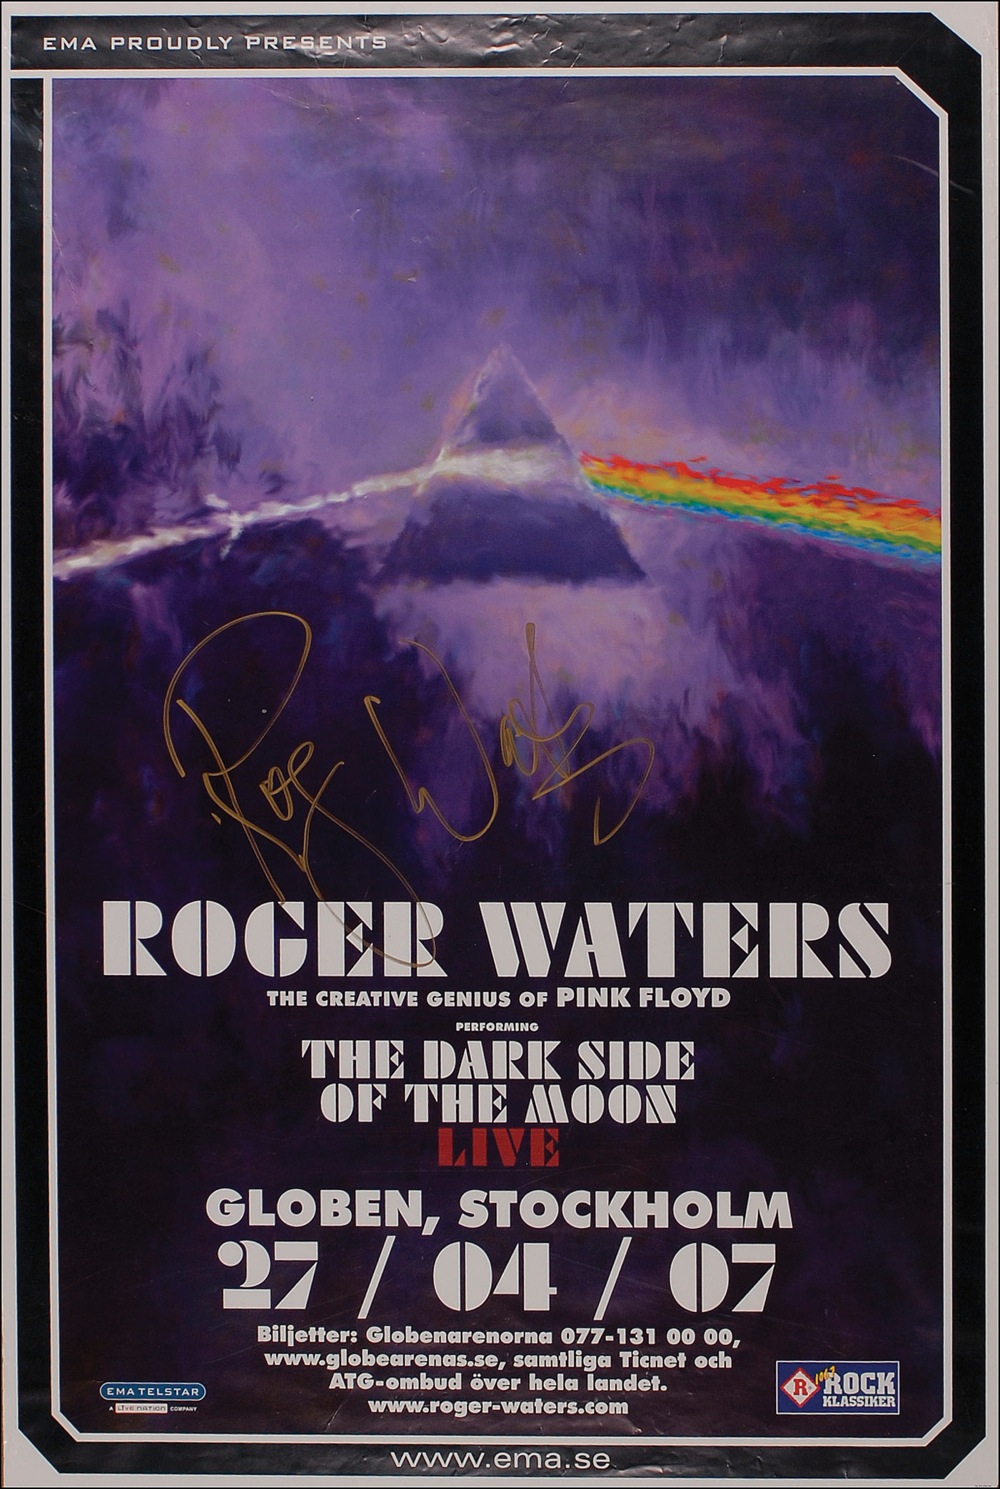 Lot #394 Roger Waters